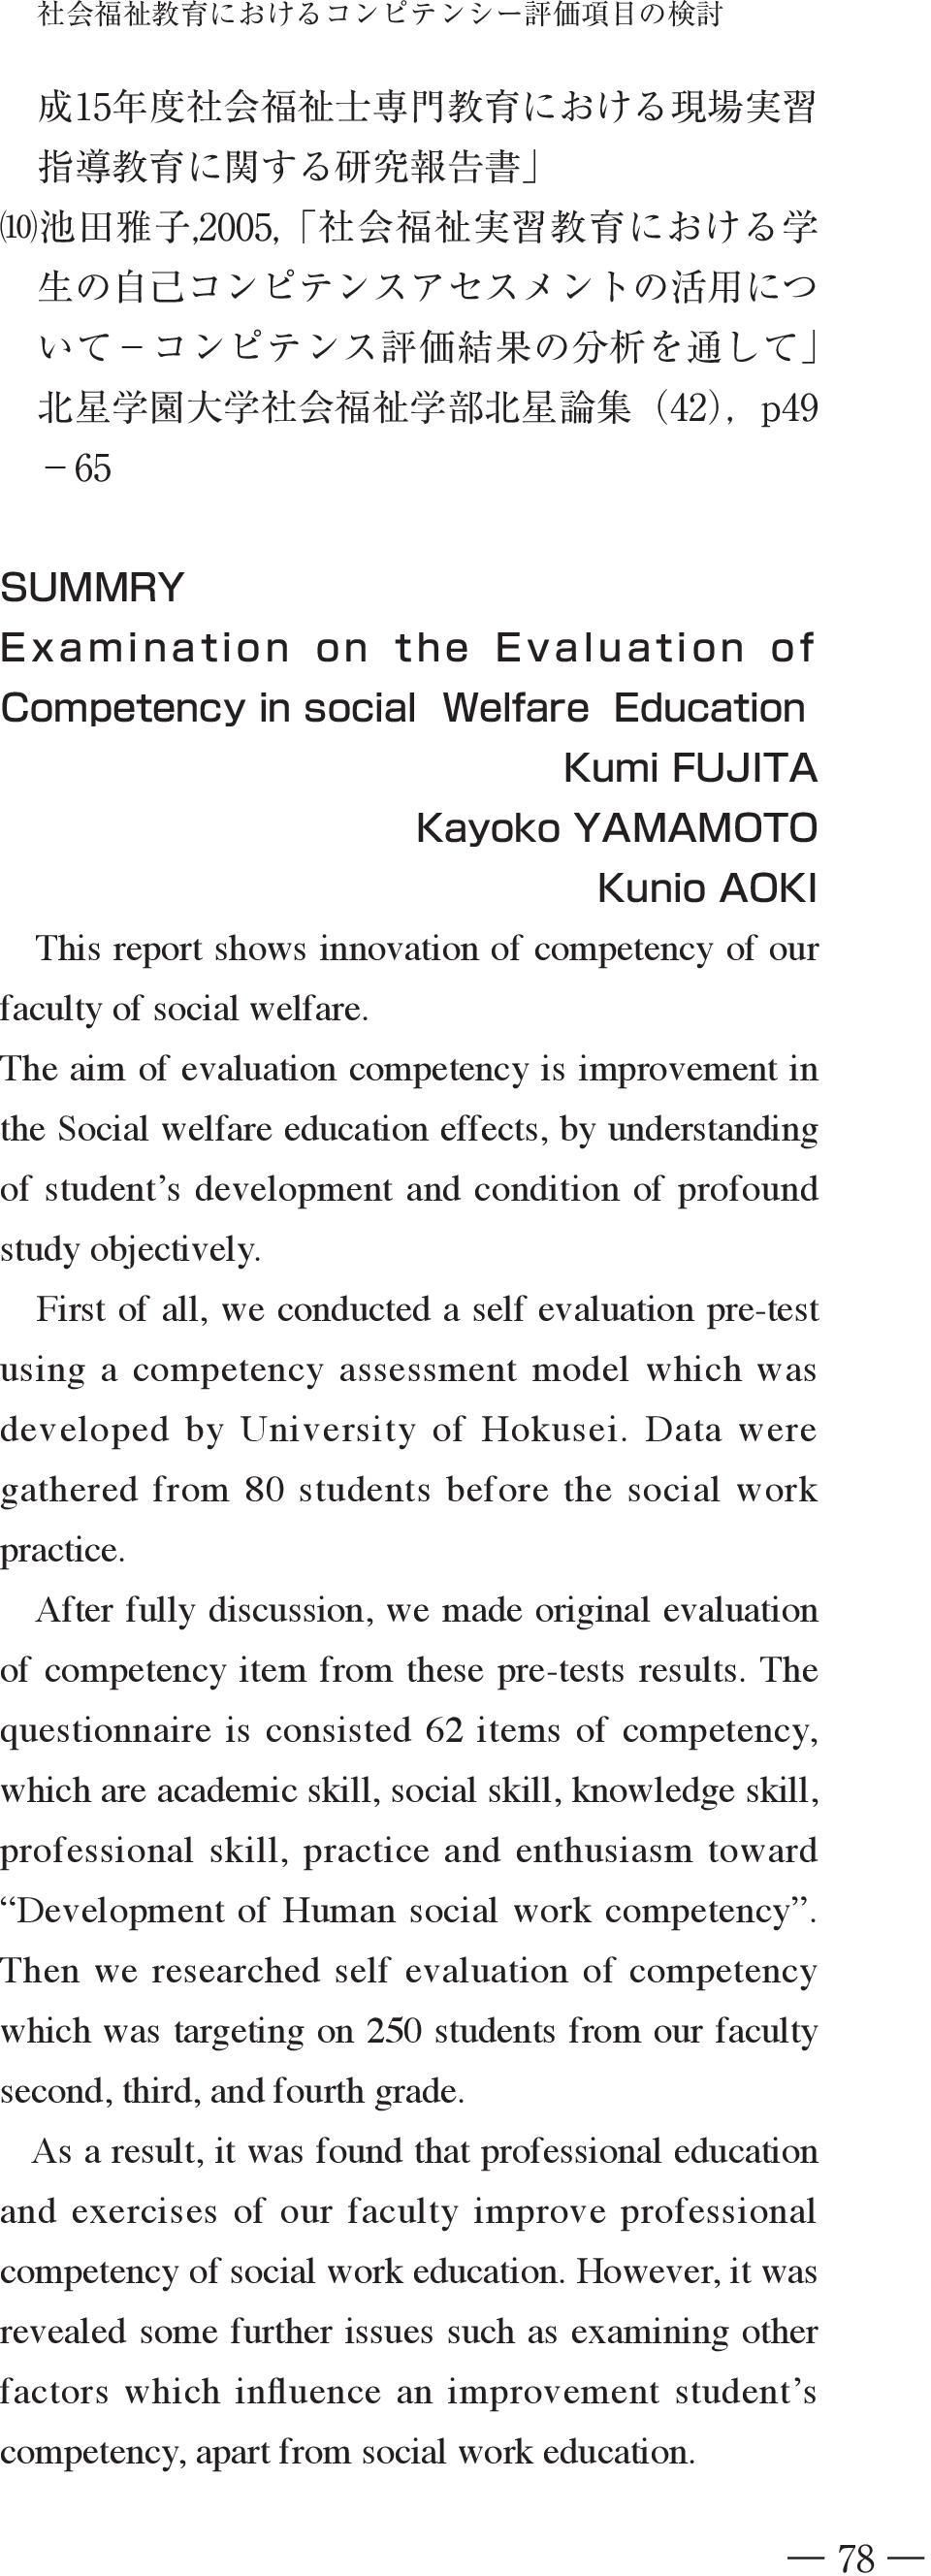 First of all, we conducted a self evaluation pre-test using a competency assessment model which was developed by University of Hokusei.